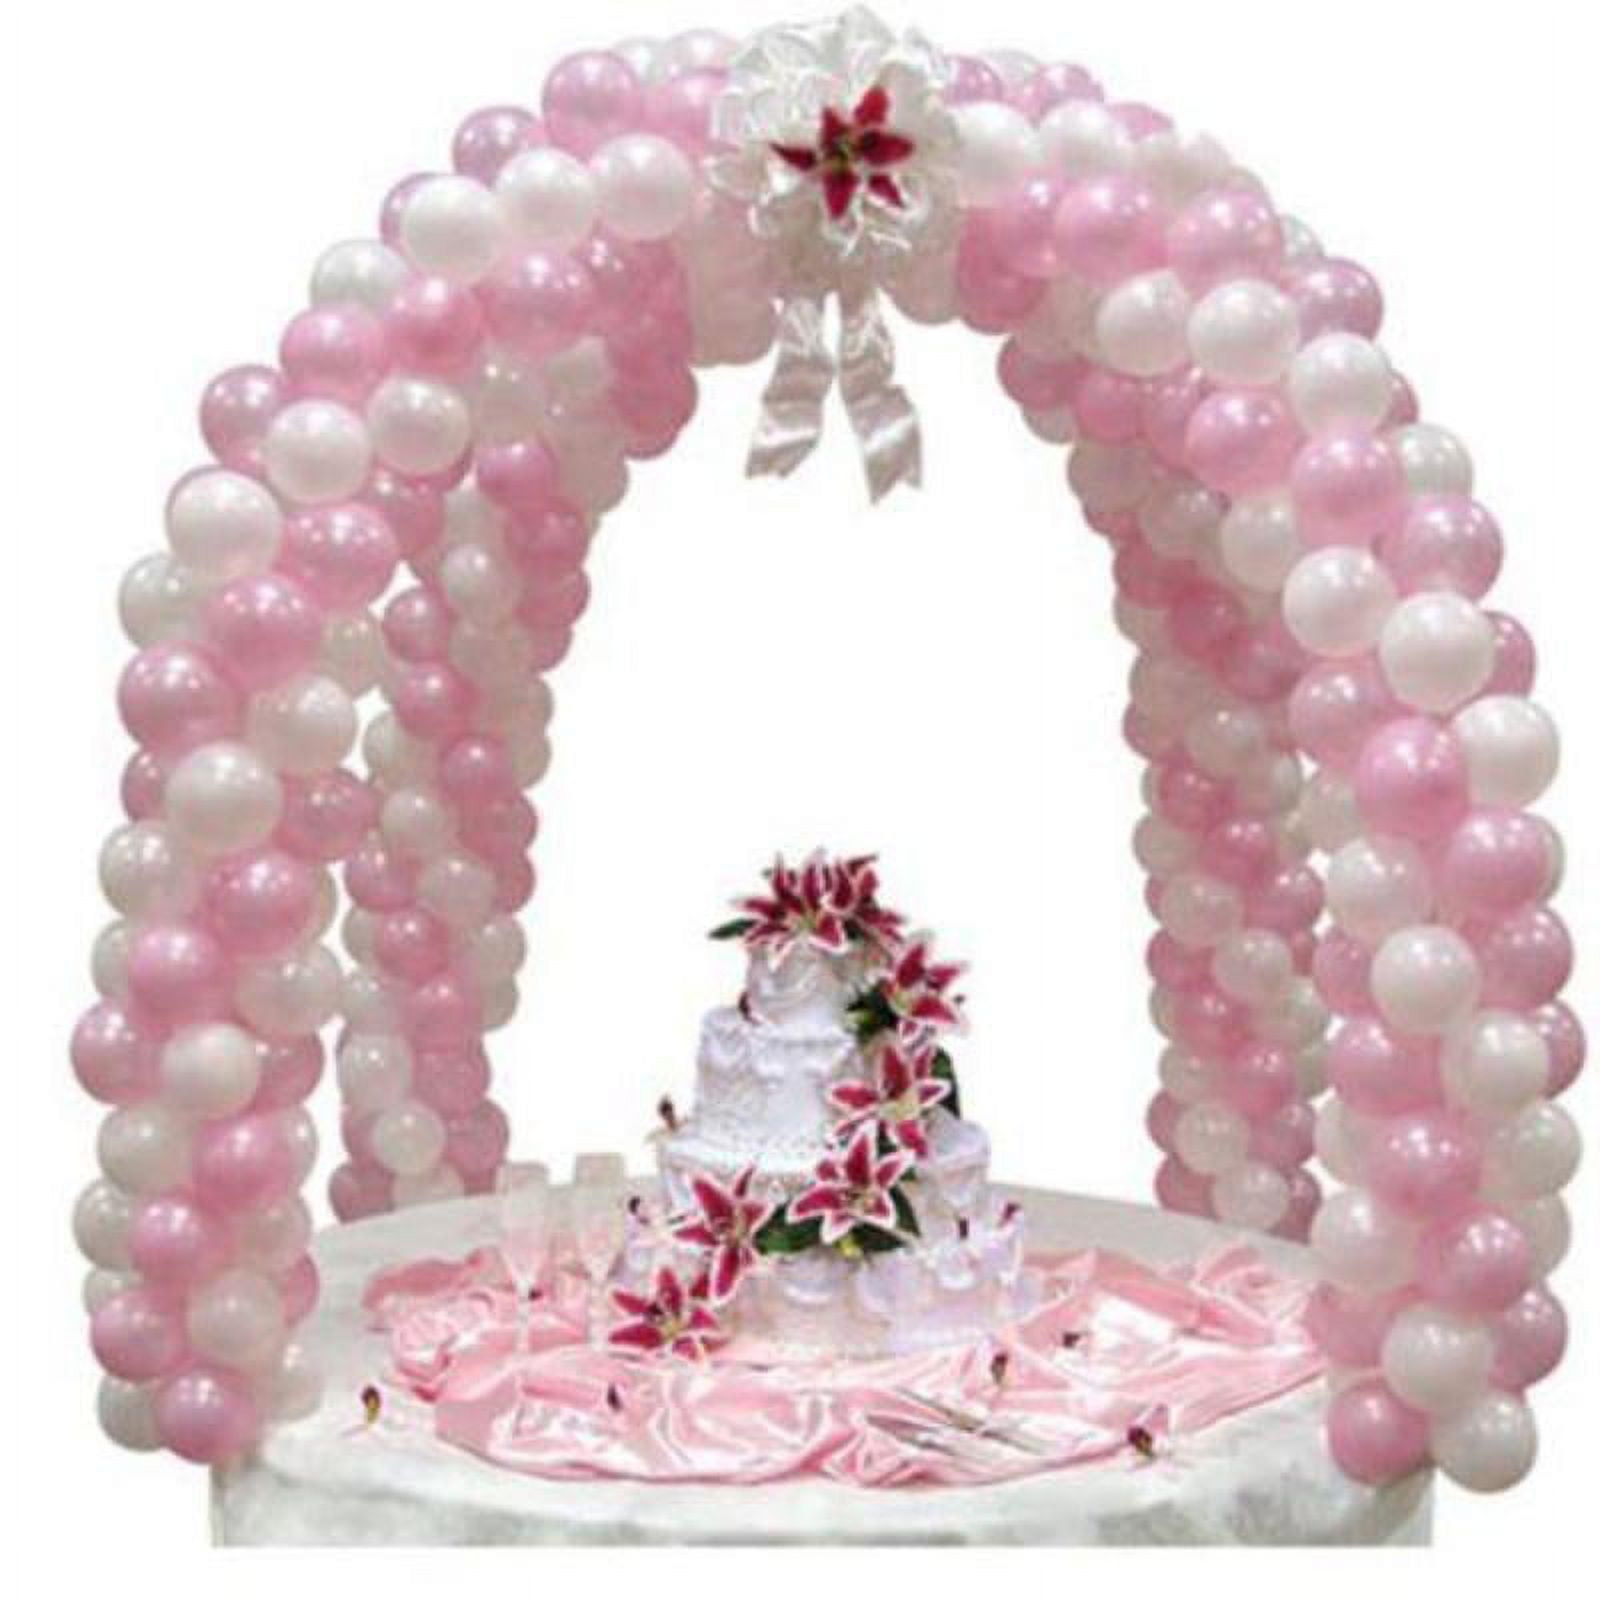 38pcs Balloon Arch Adjustable Table Balloons Arches Frame Stand Kit For  Wedding Birthday Decorations Baby Shower